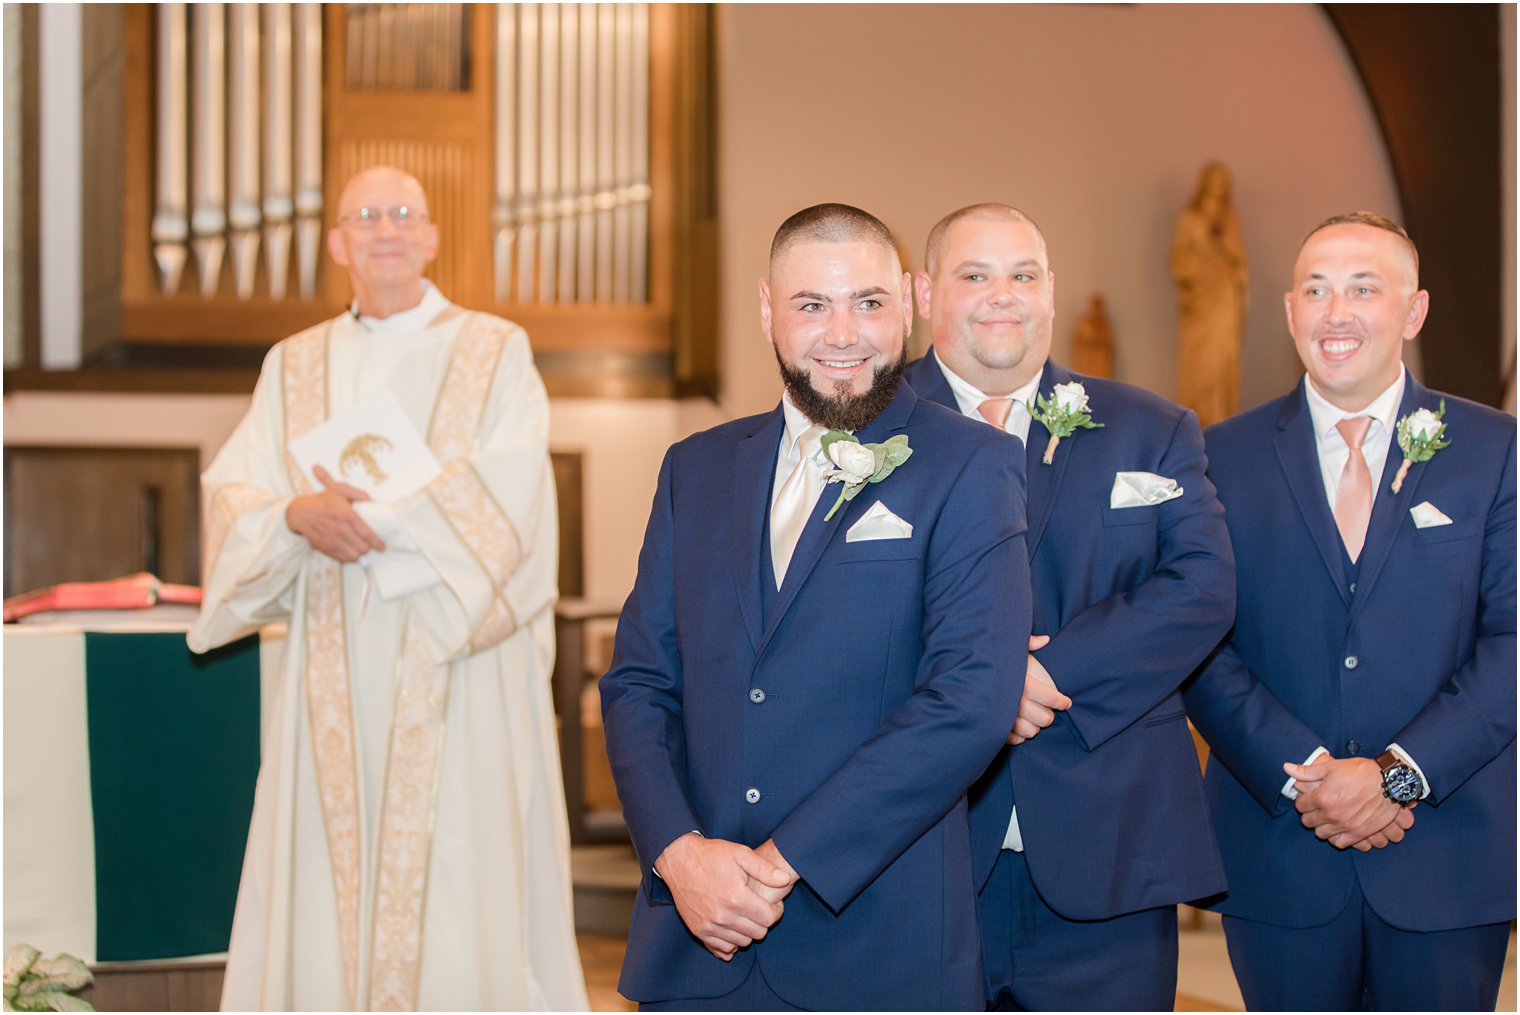 groom smiles looking at bride during traditional wedding ceremony at Saint Matthew the Apostle church